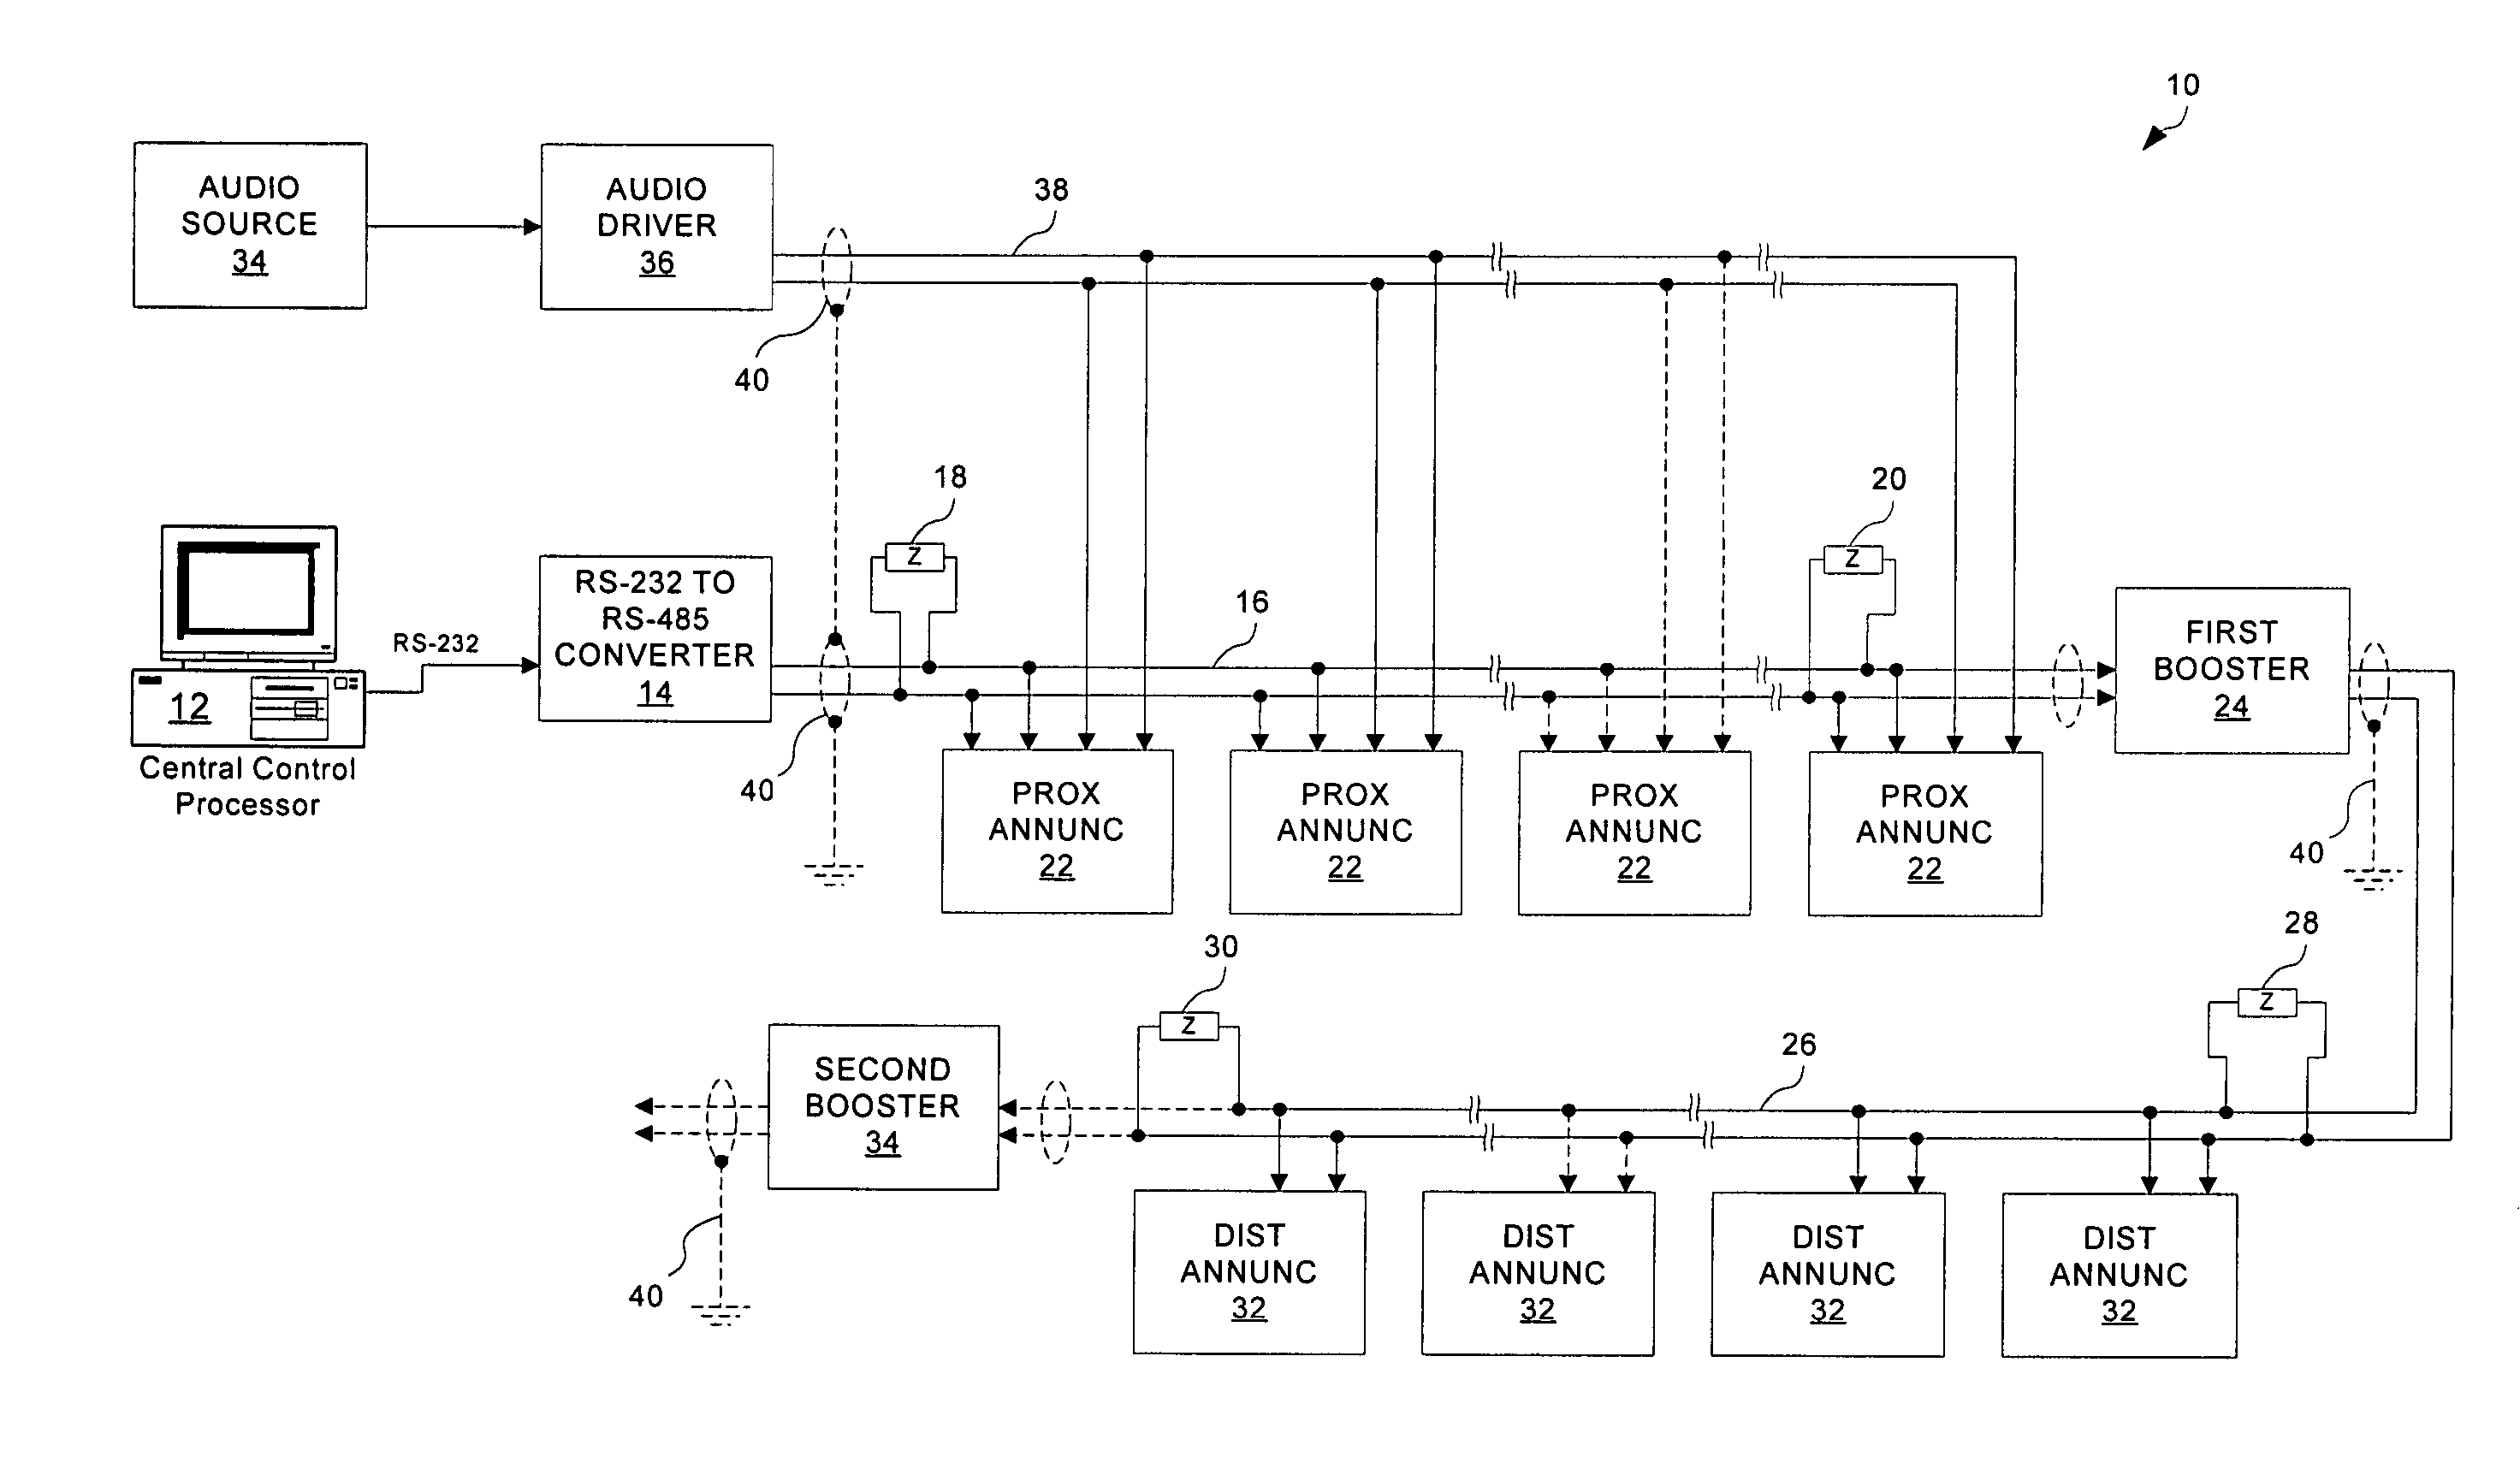 Programmable event driver/interface apparatus and method